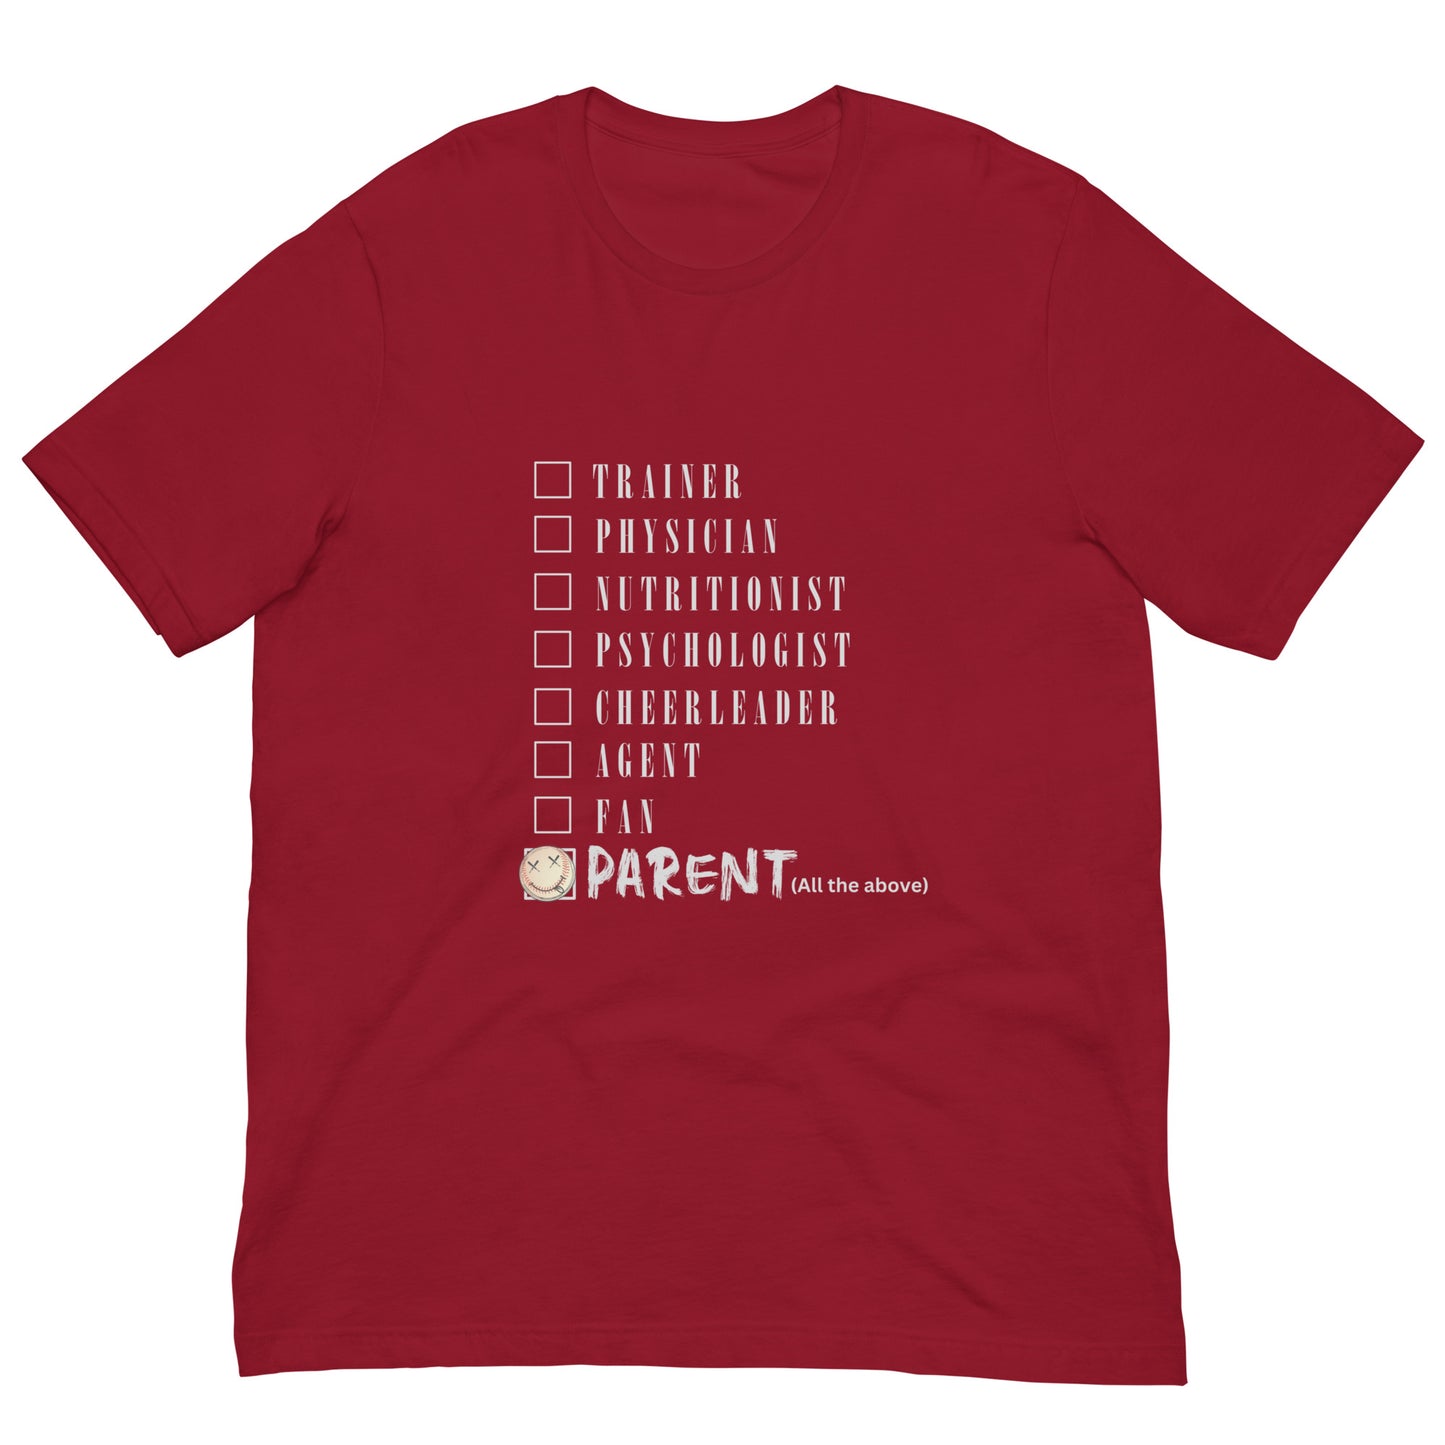 Dad's "Parents Are..." t-shirt